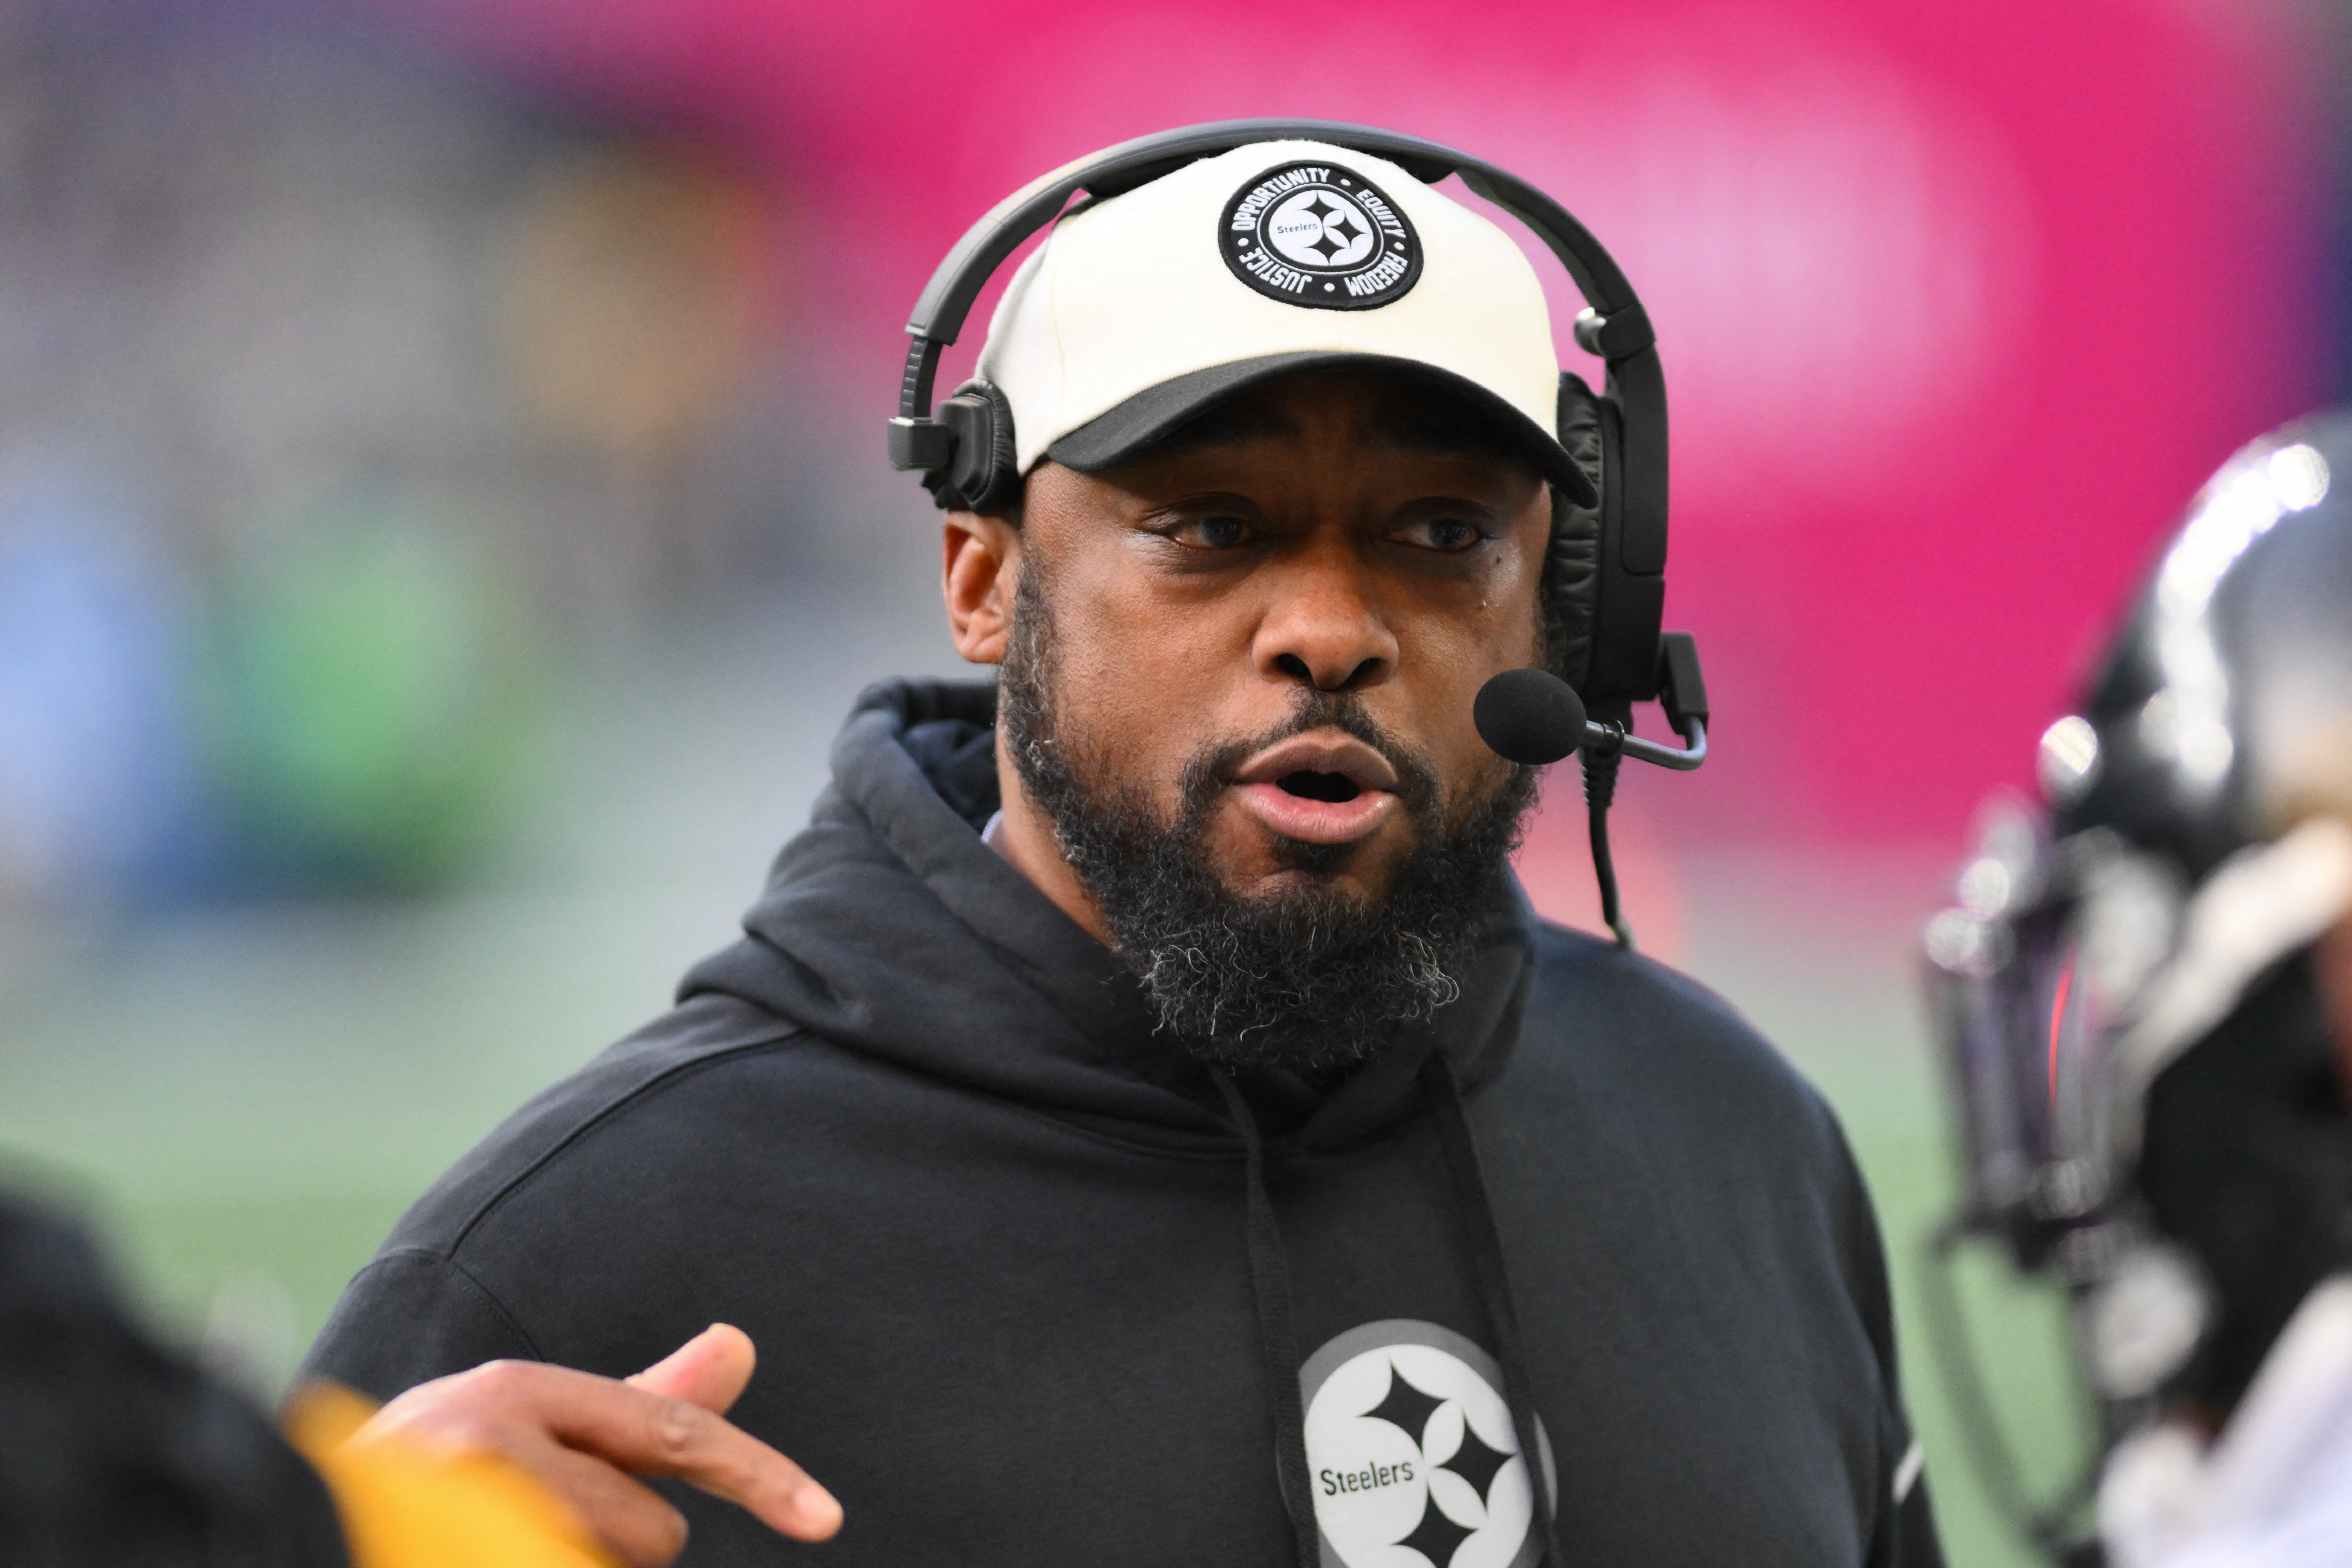 Steelers sign coach Mike Tomlin to 3-year extension | Reuters